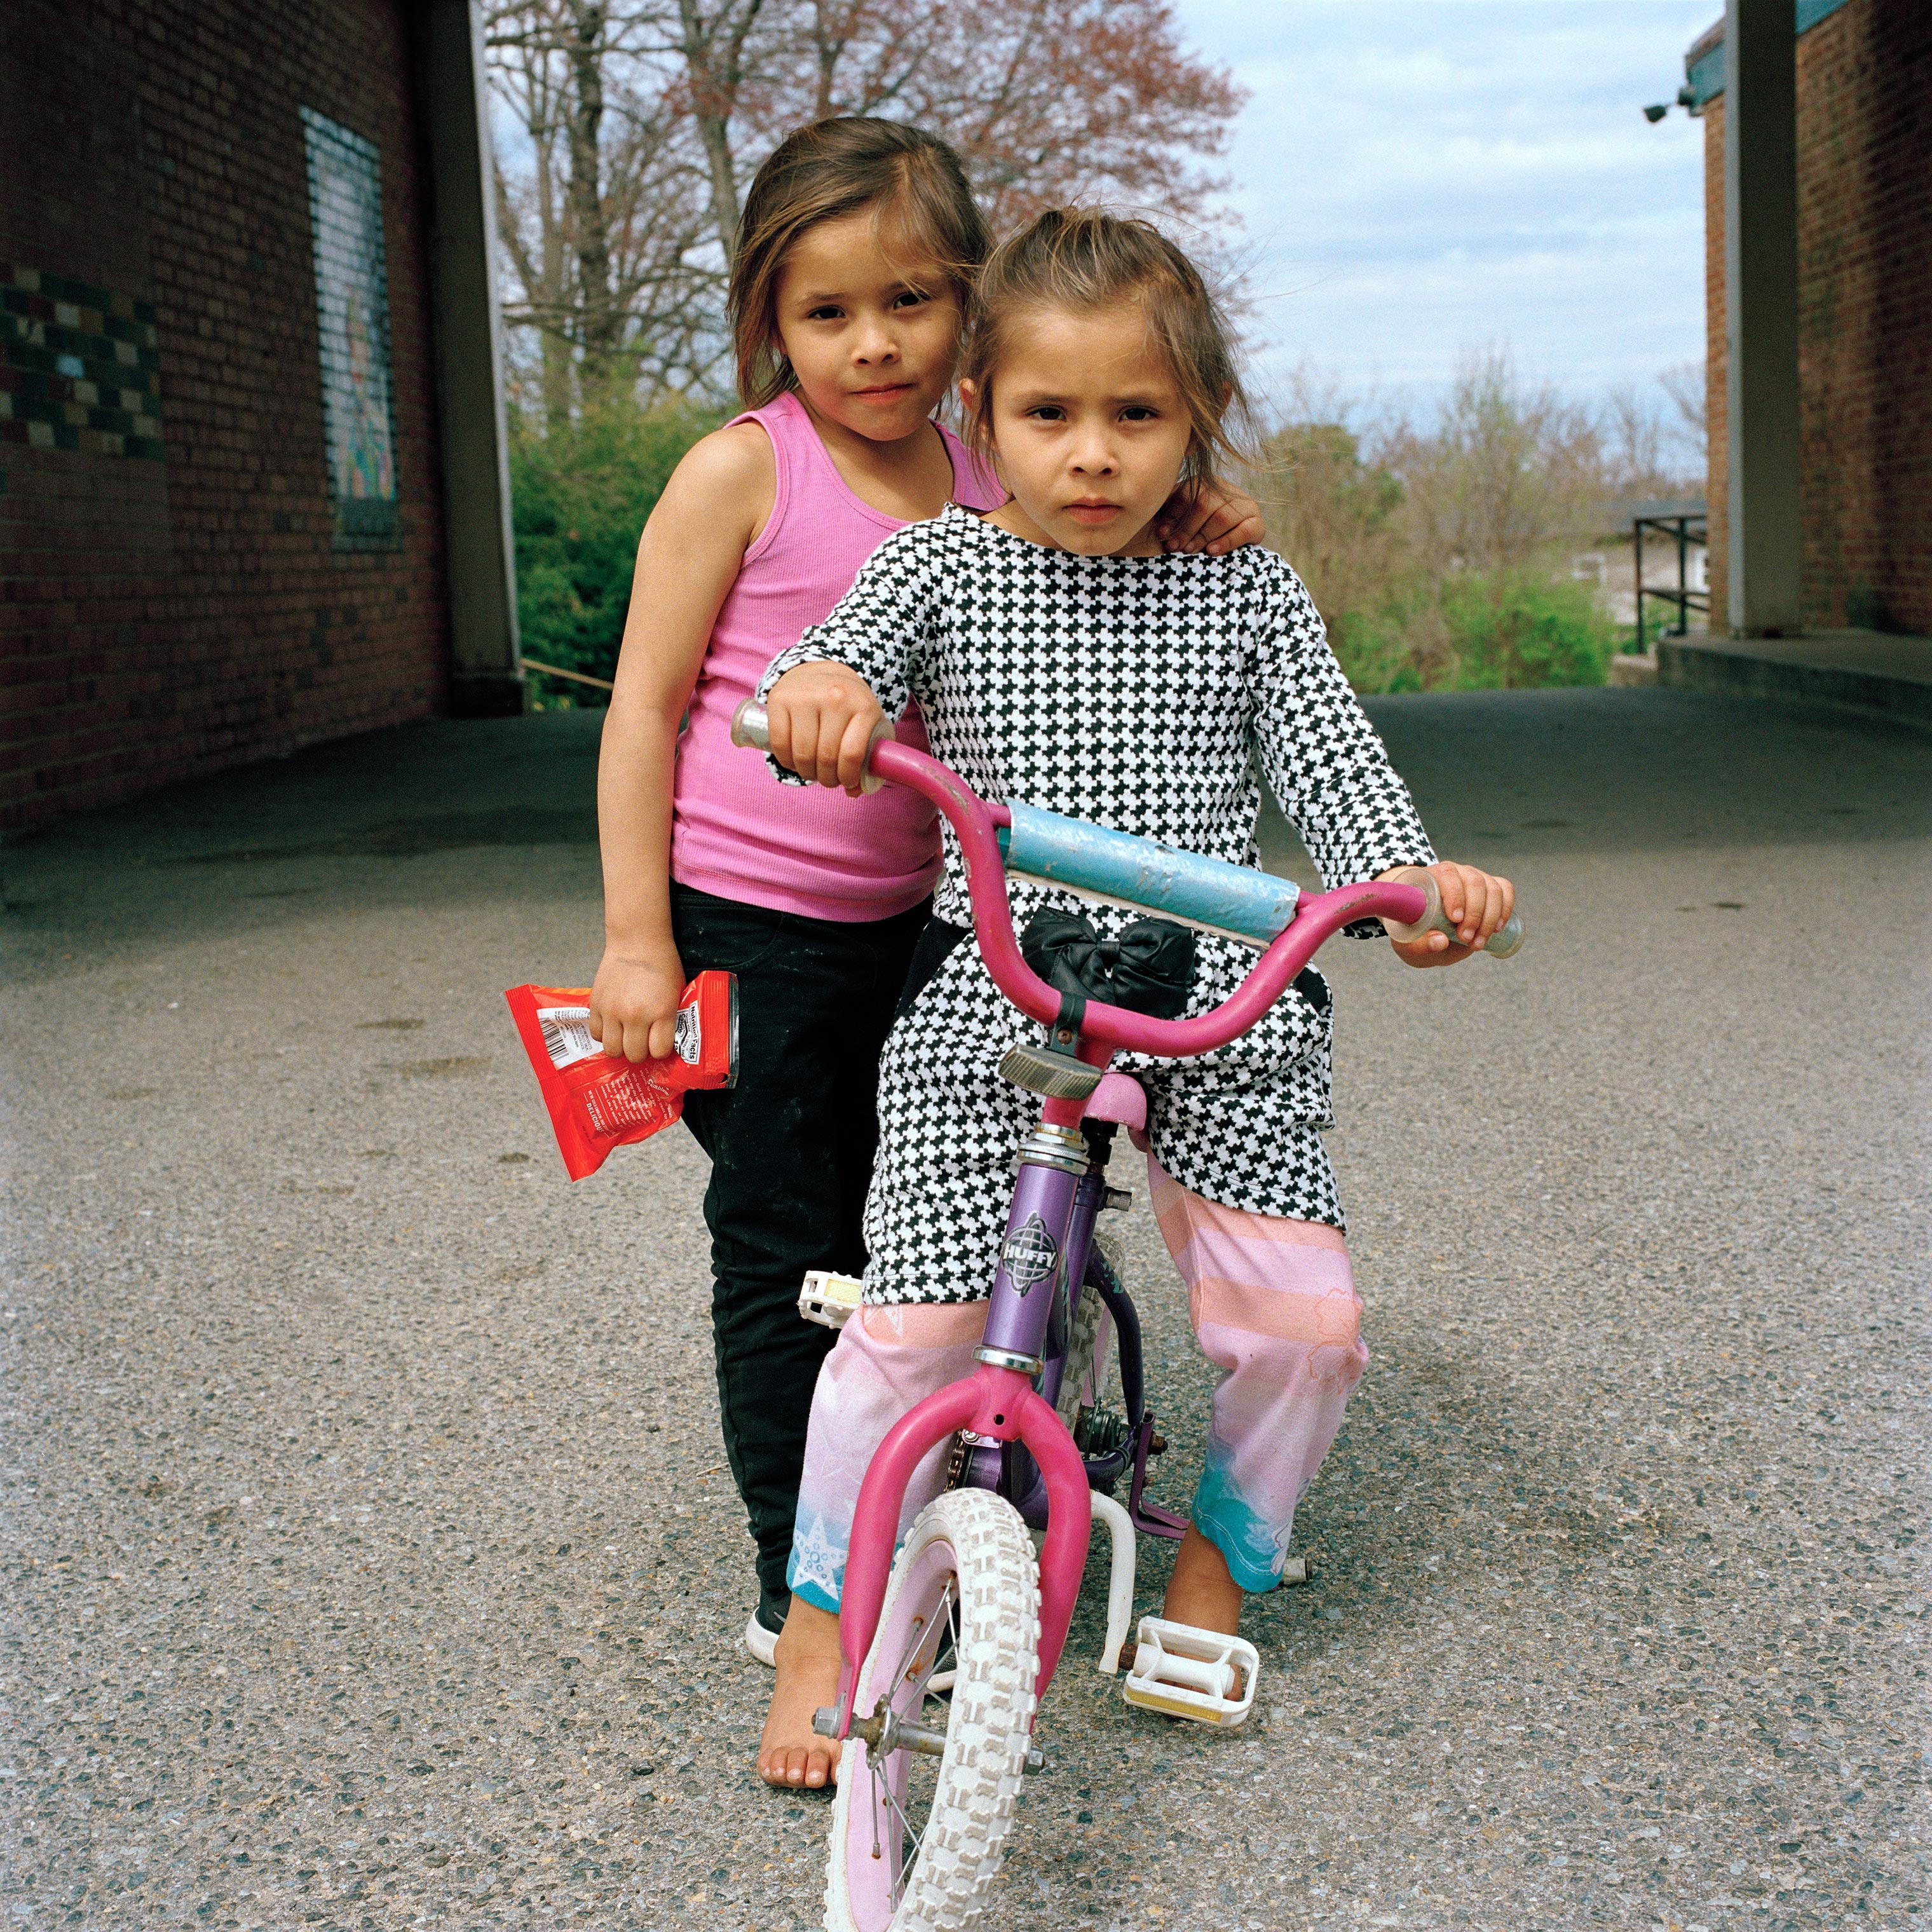 Sayra, left, and Cheyli play with a new bicycle on April 4. (Federica Valabrega)